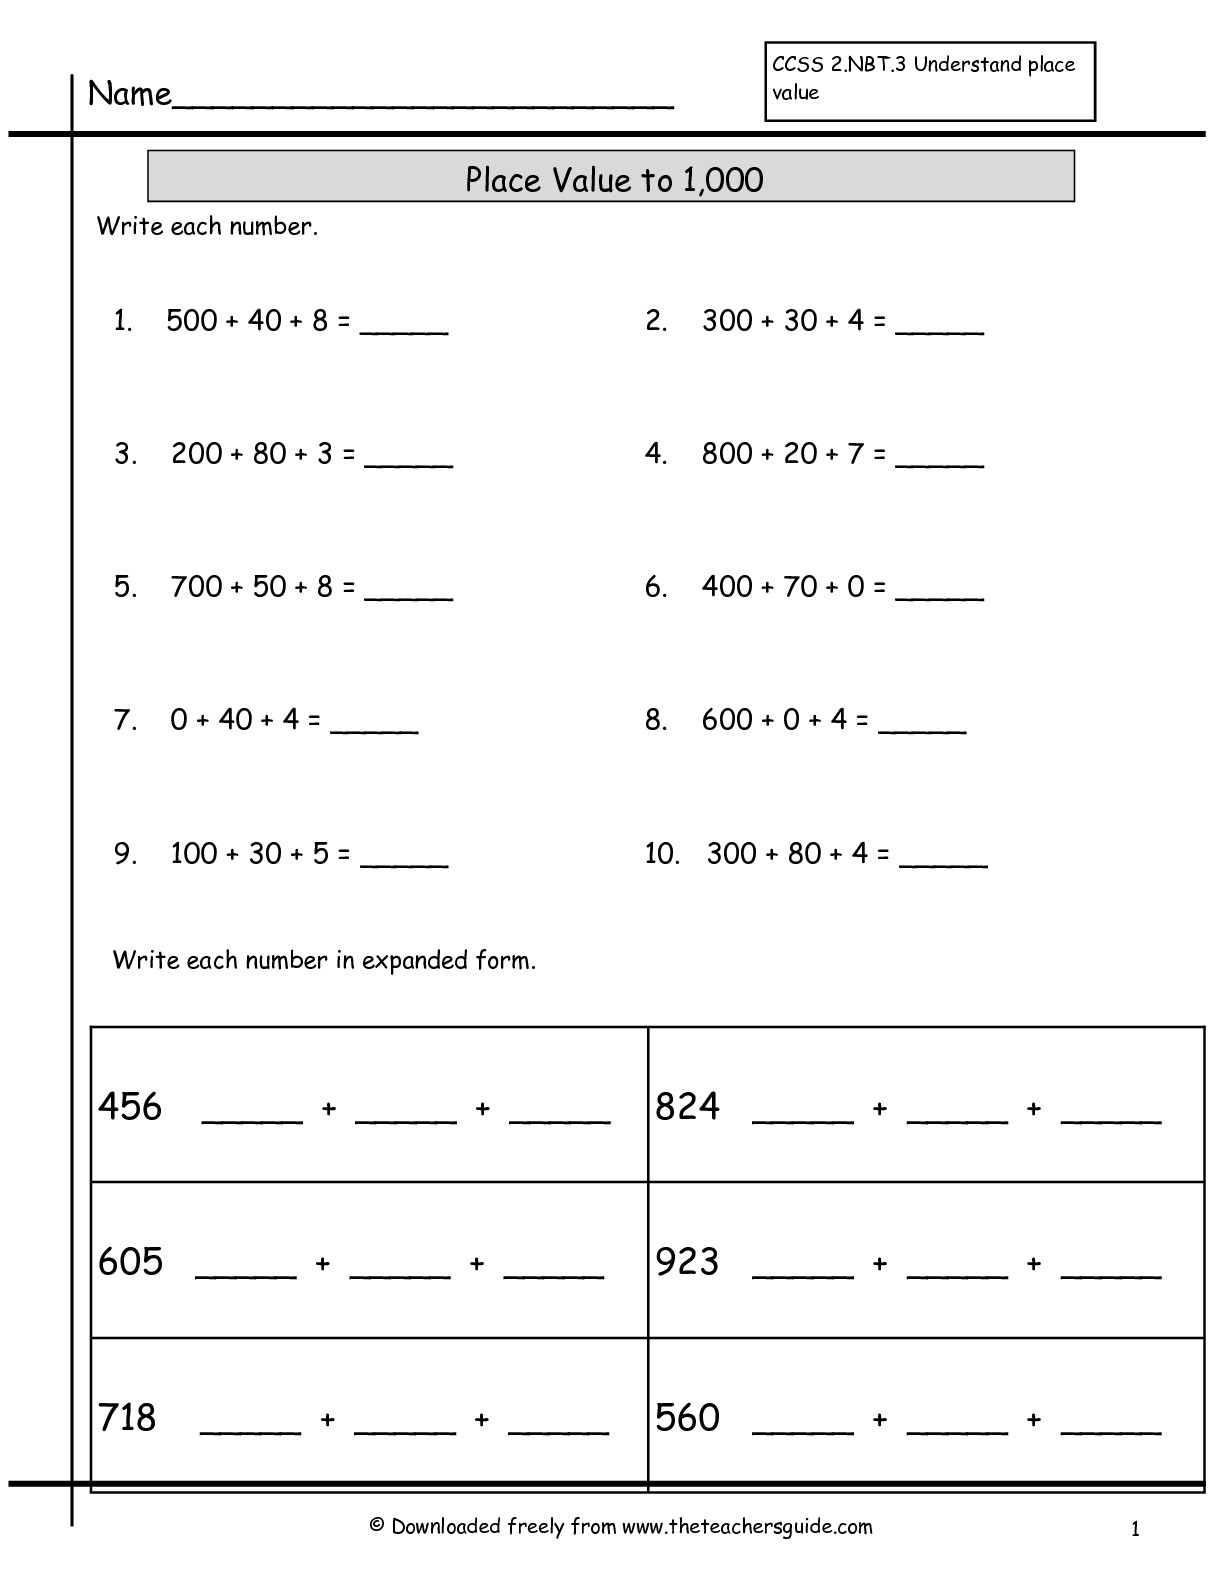 Write Numbers in Expanded Form Worksheet Image